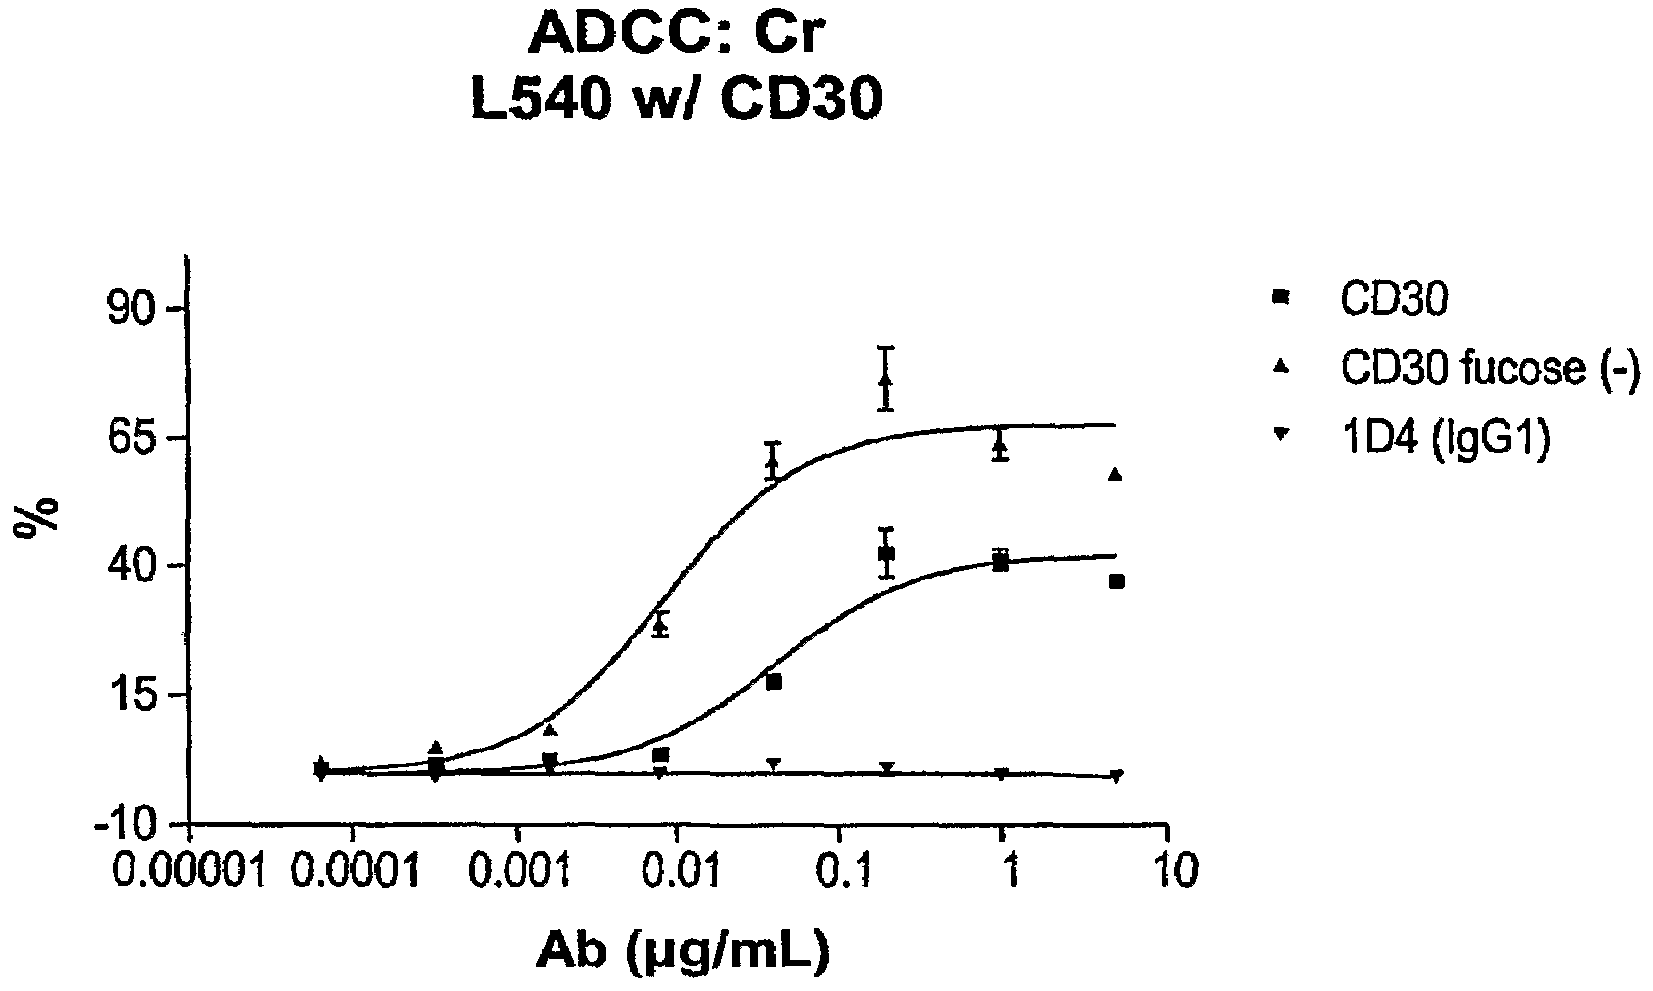 Monoclonal antibodies against cd30 lacking in fucosyl and xylosyl residues